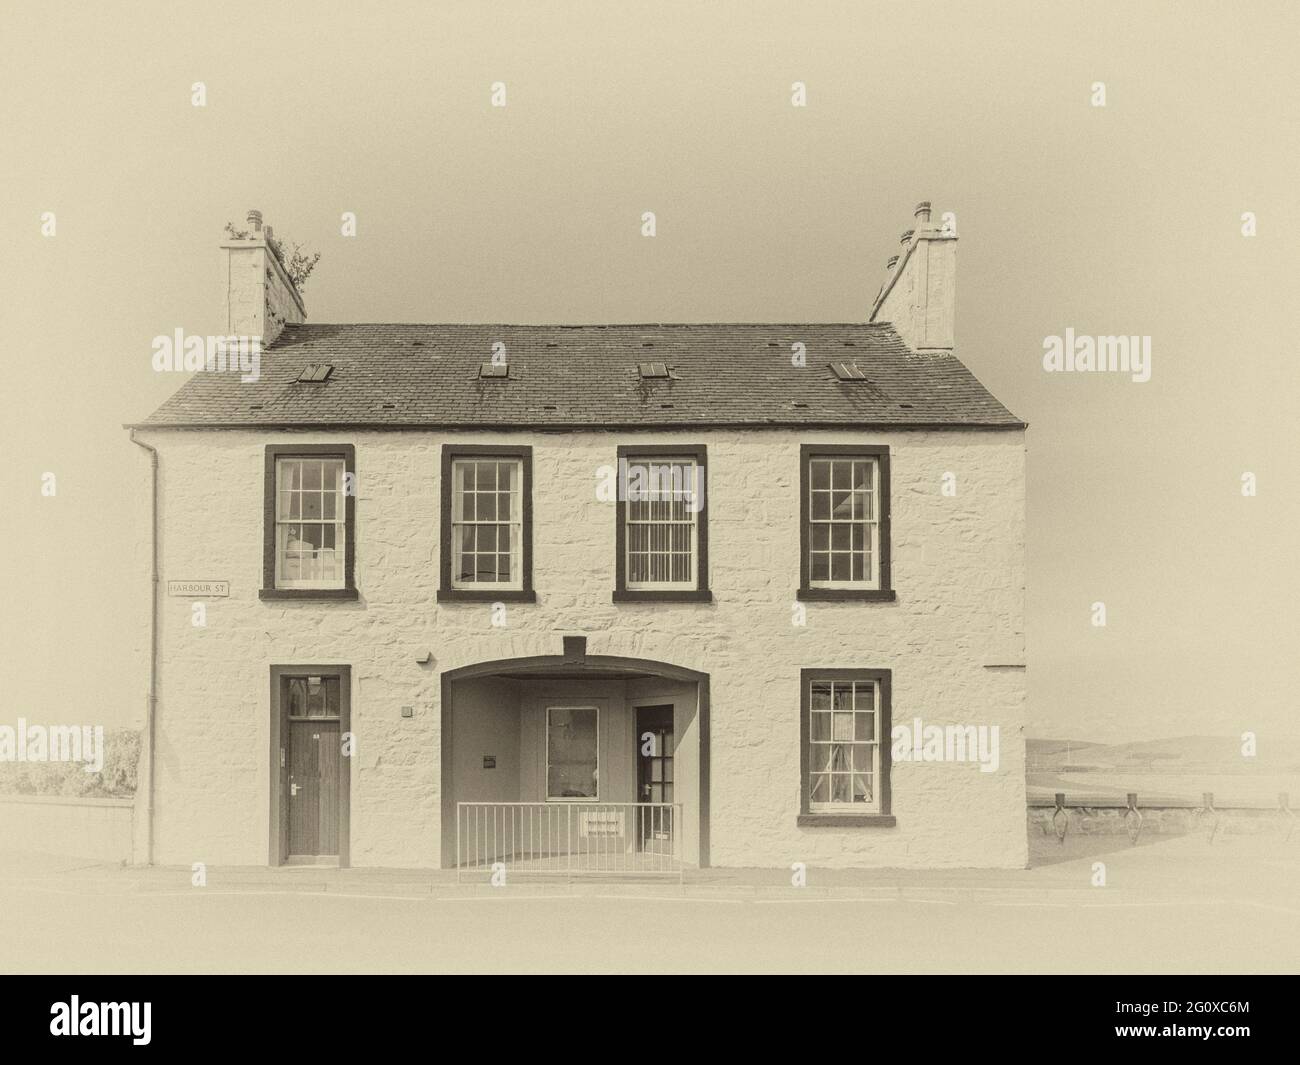 The image is of the Old Customs House on the west coast town and port of Stranraer known as being the most westerly point in the British Isles Stock Photo